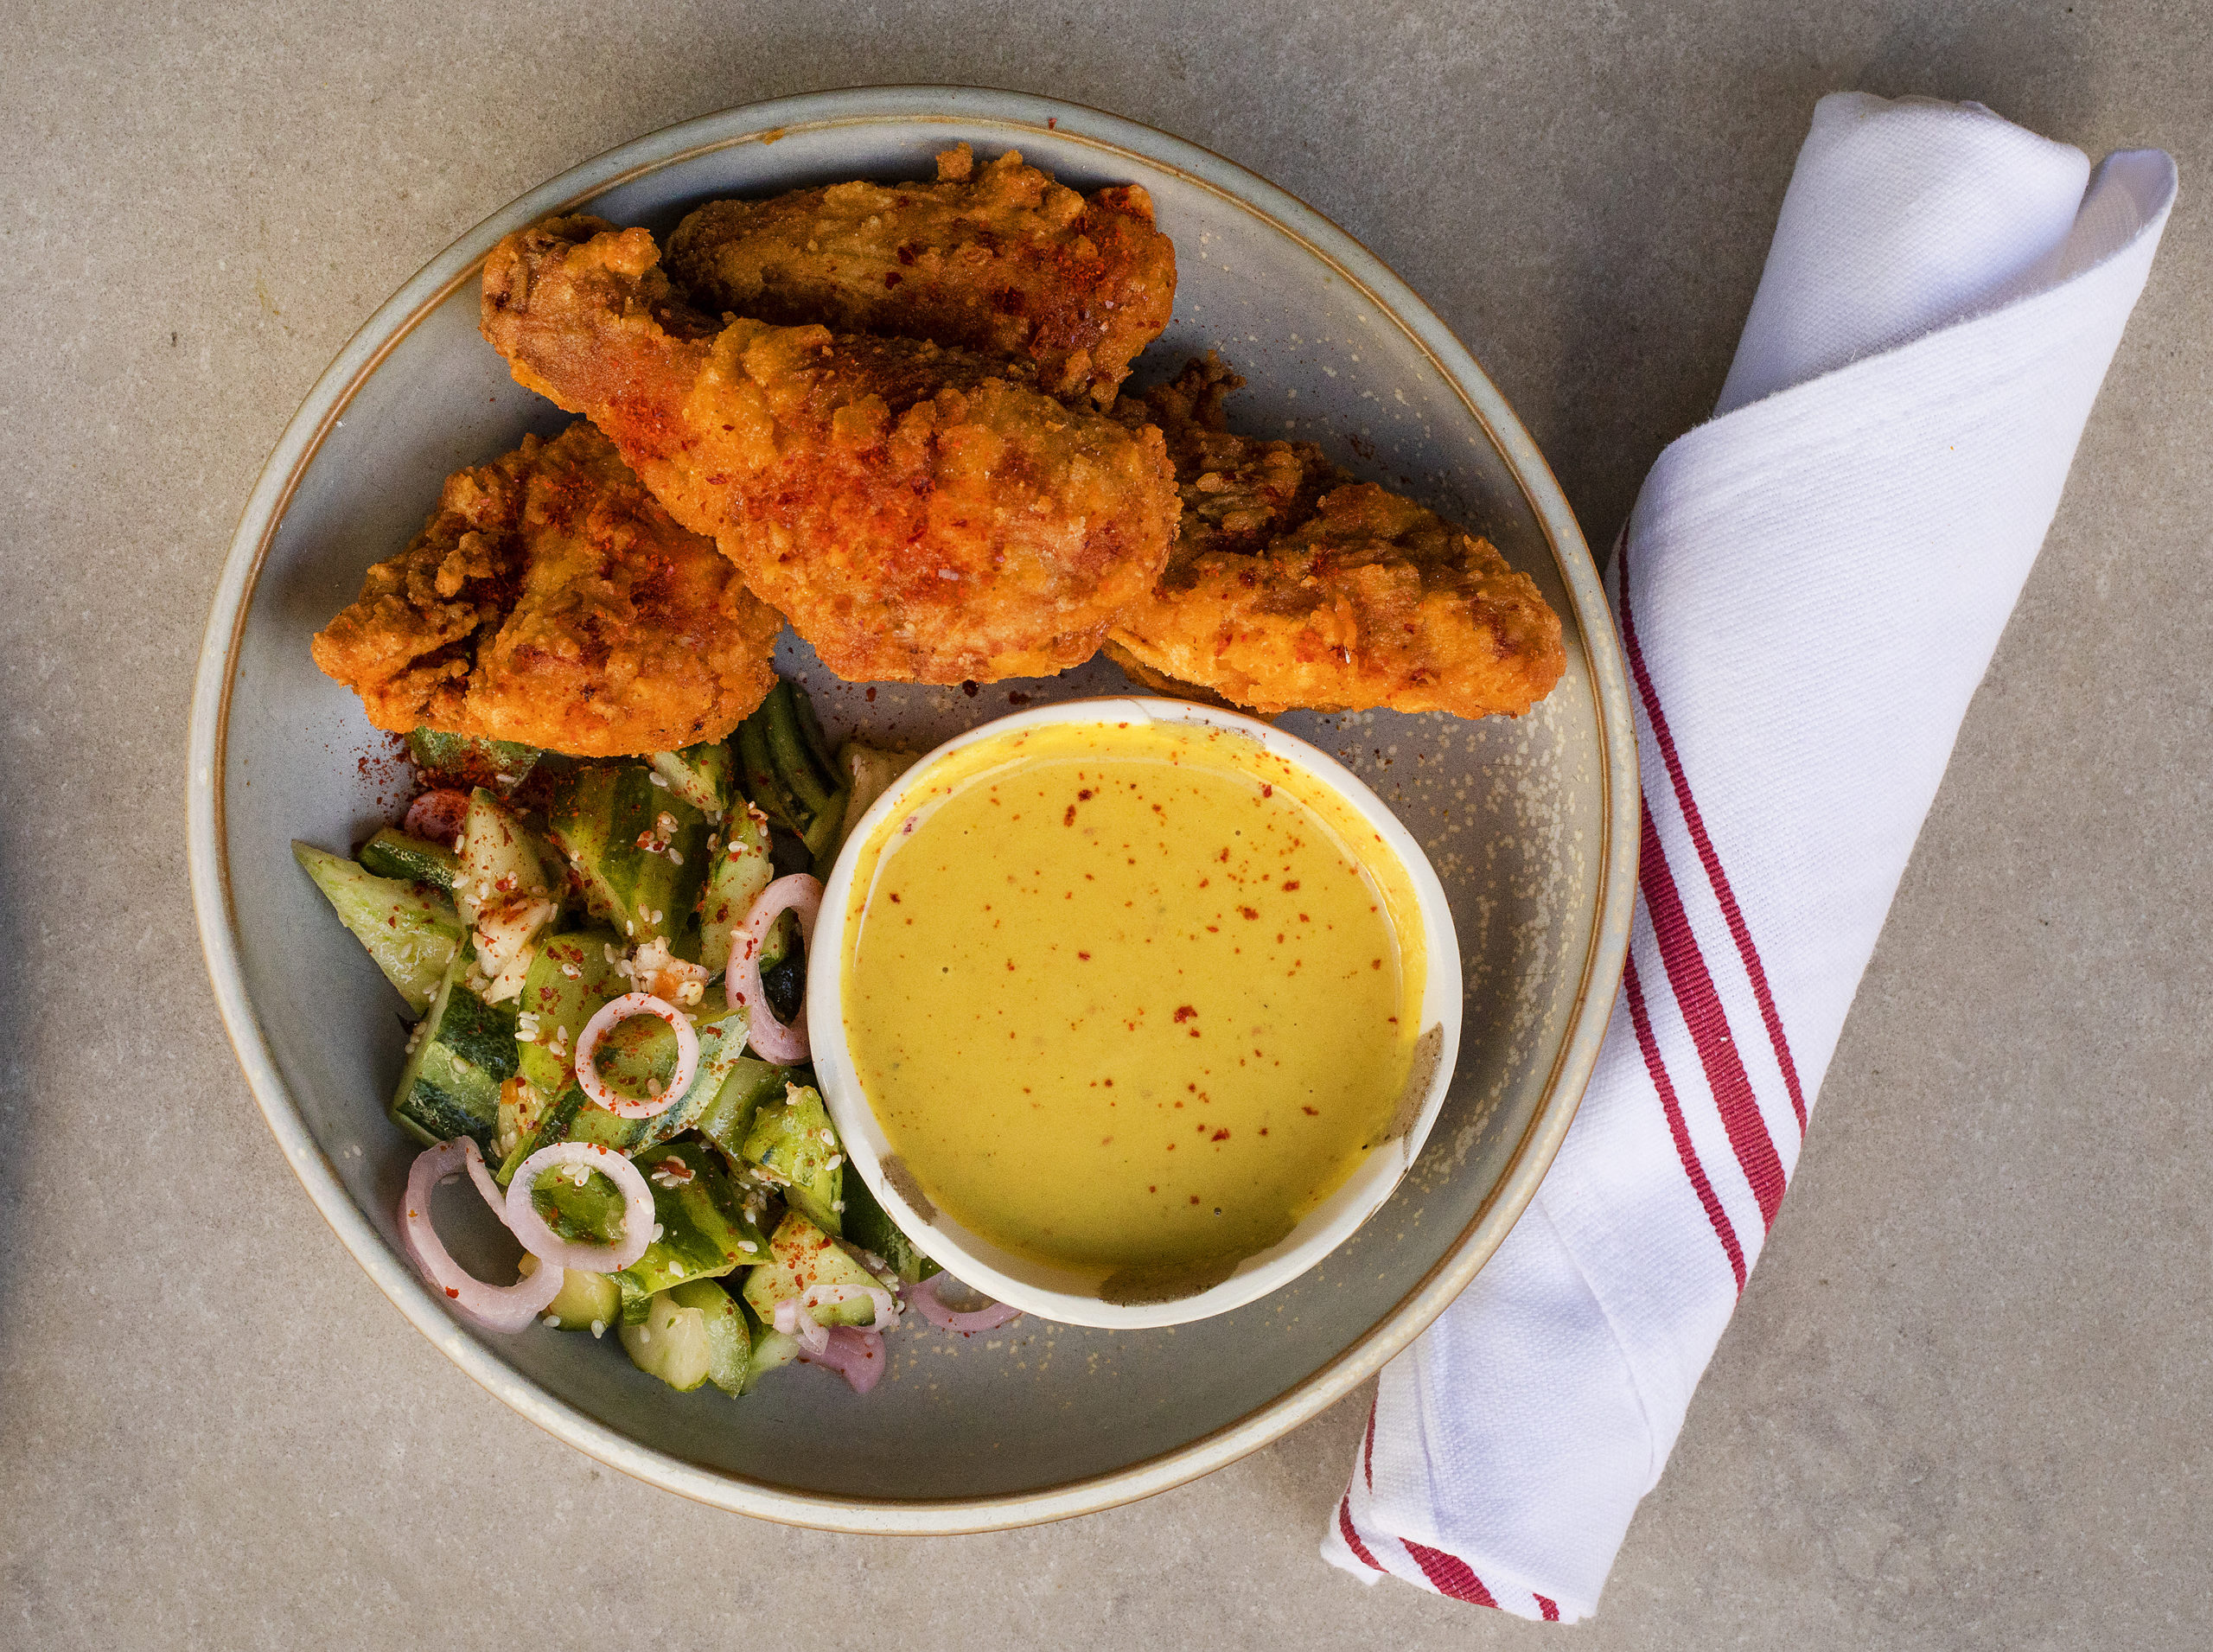 Fried chicken with cucumber and coconut peanut curry from Valley Bar + Bottle on the Sonoma square. (John Burgess/The Press Democrat)